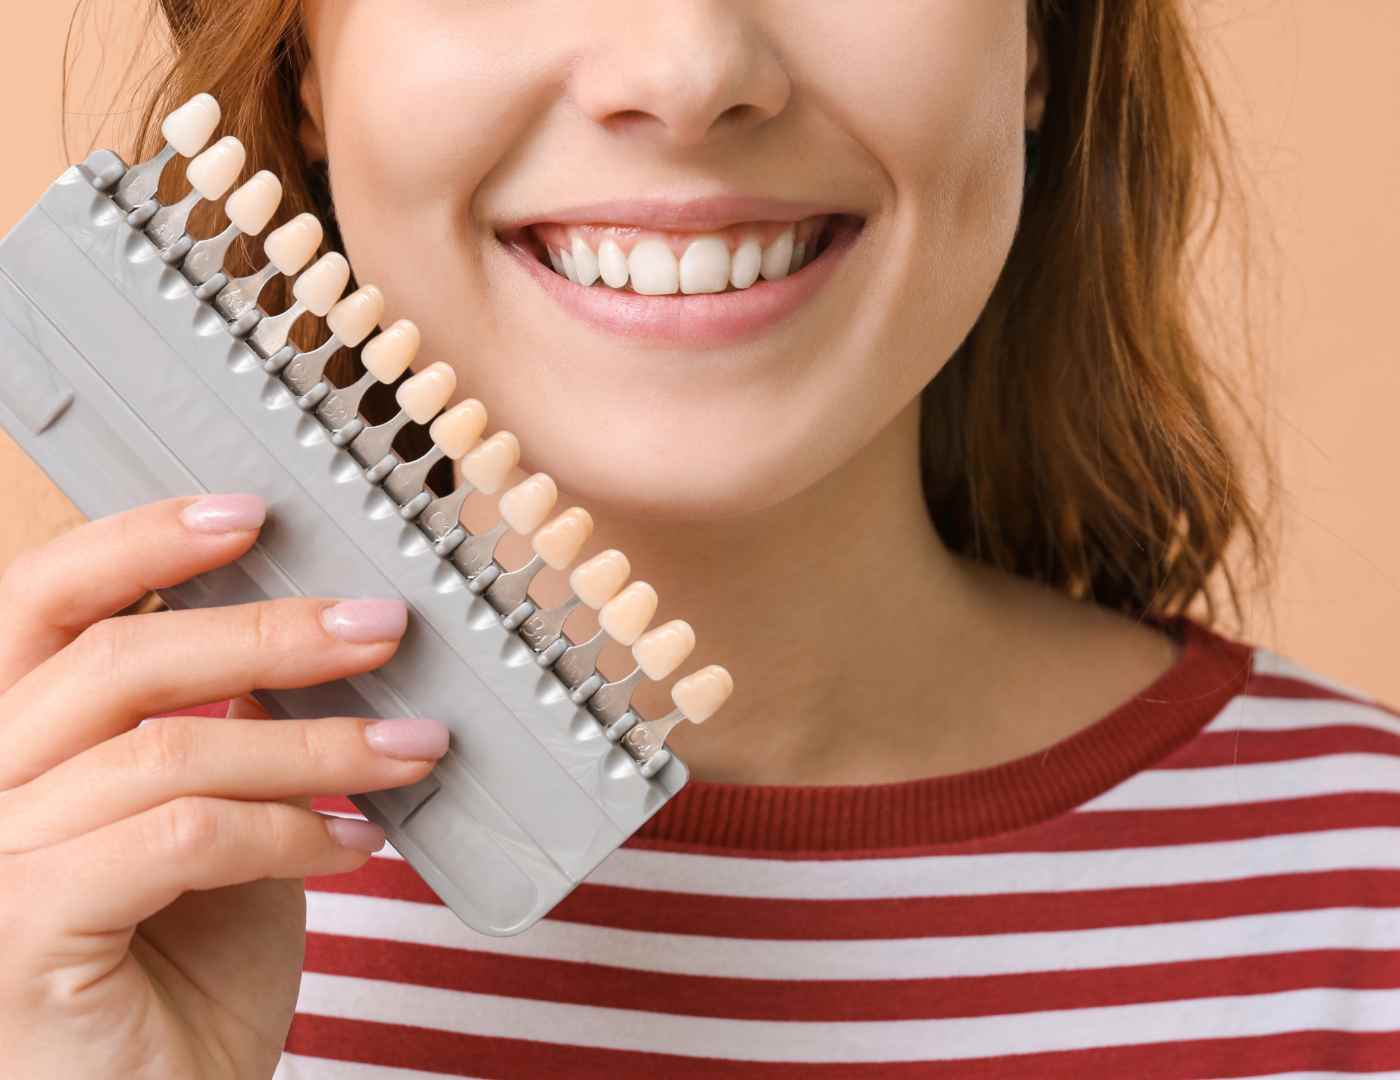 Are Veneers Permanent or Removable?